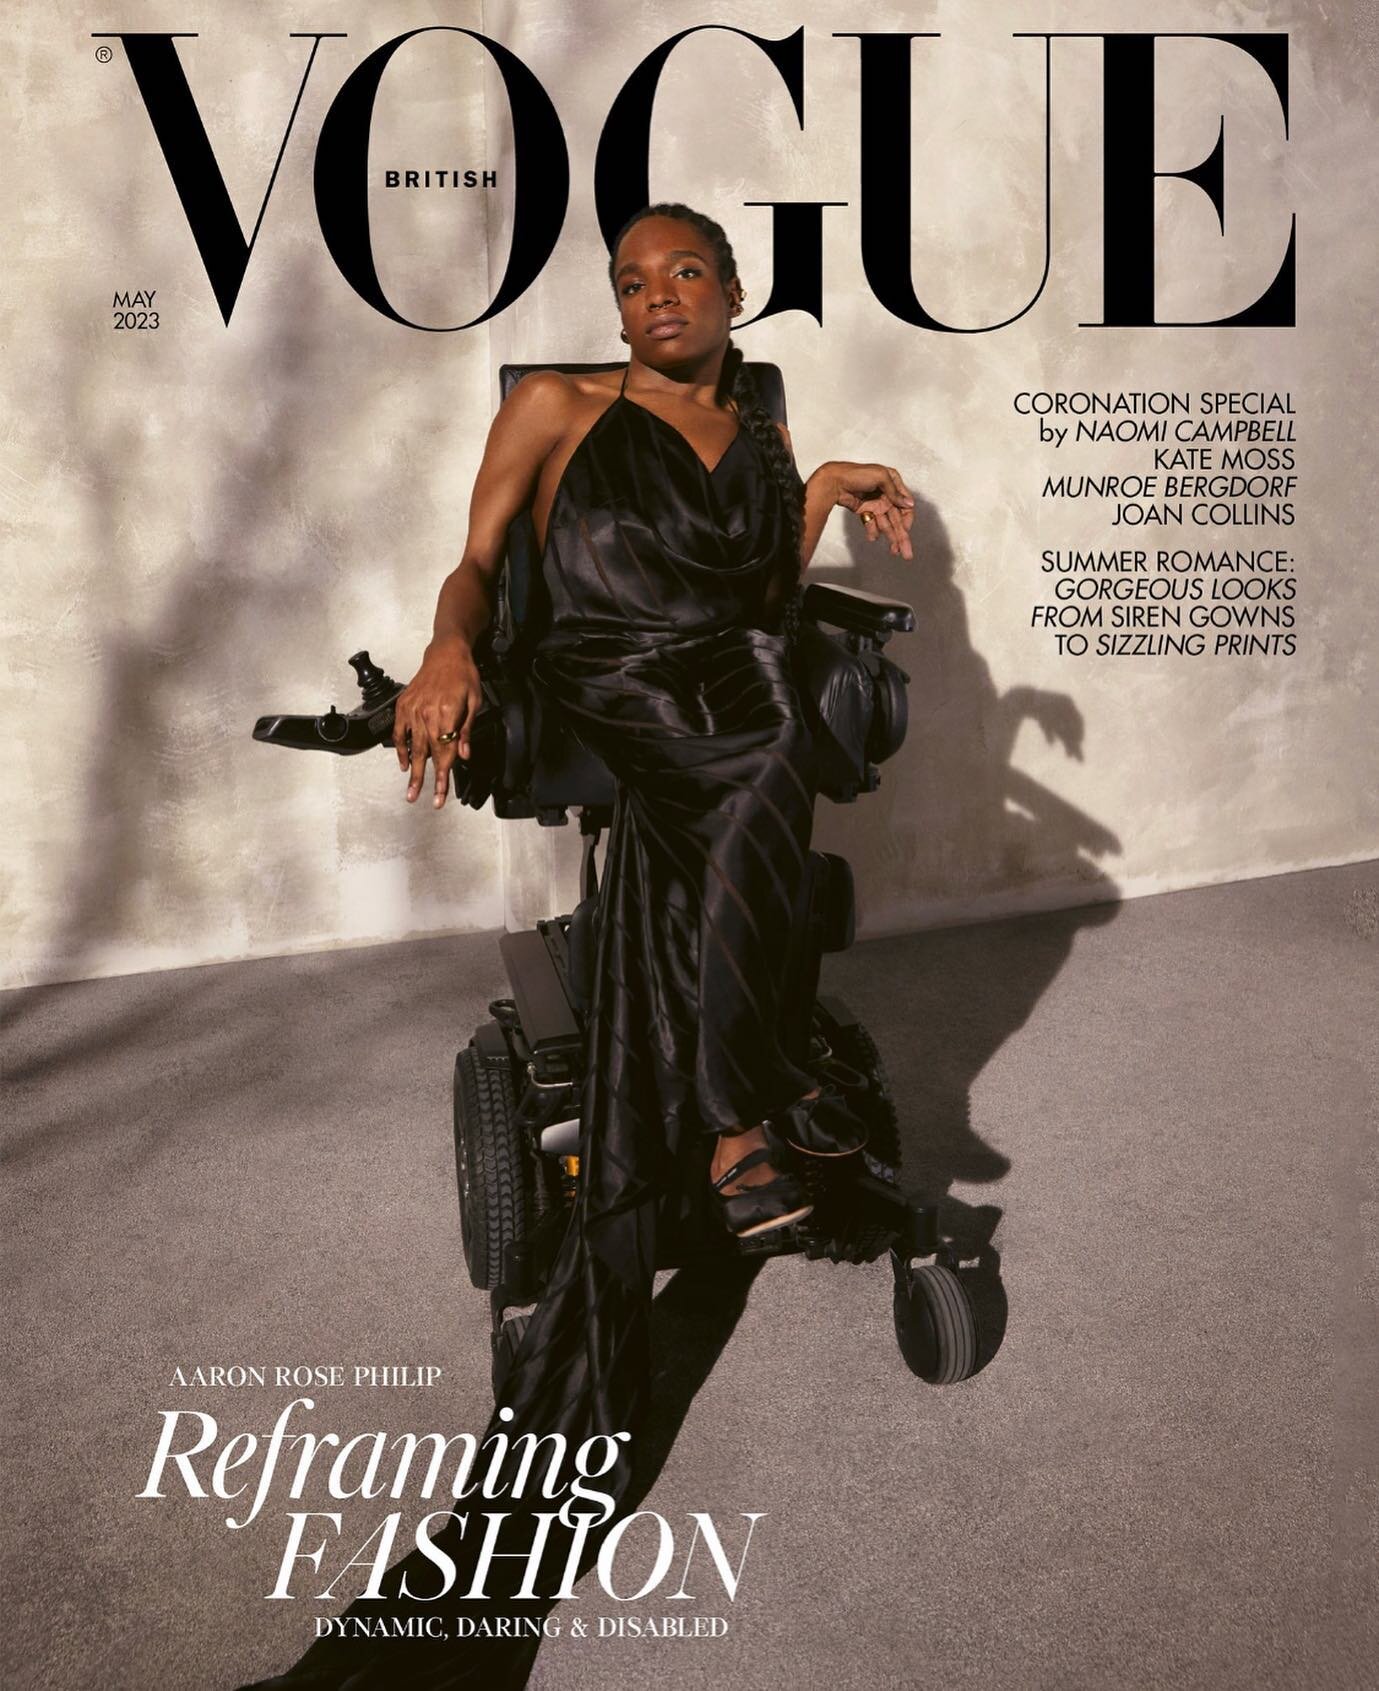 So honored to be working for this magazine and its visionary editor Edward Enninful. 
THIS is modern fashion.

@edward_enninful
@britishvogue 
@aaron___philip